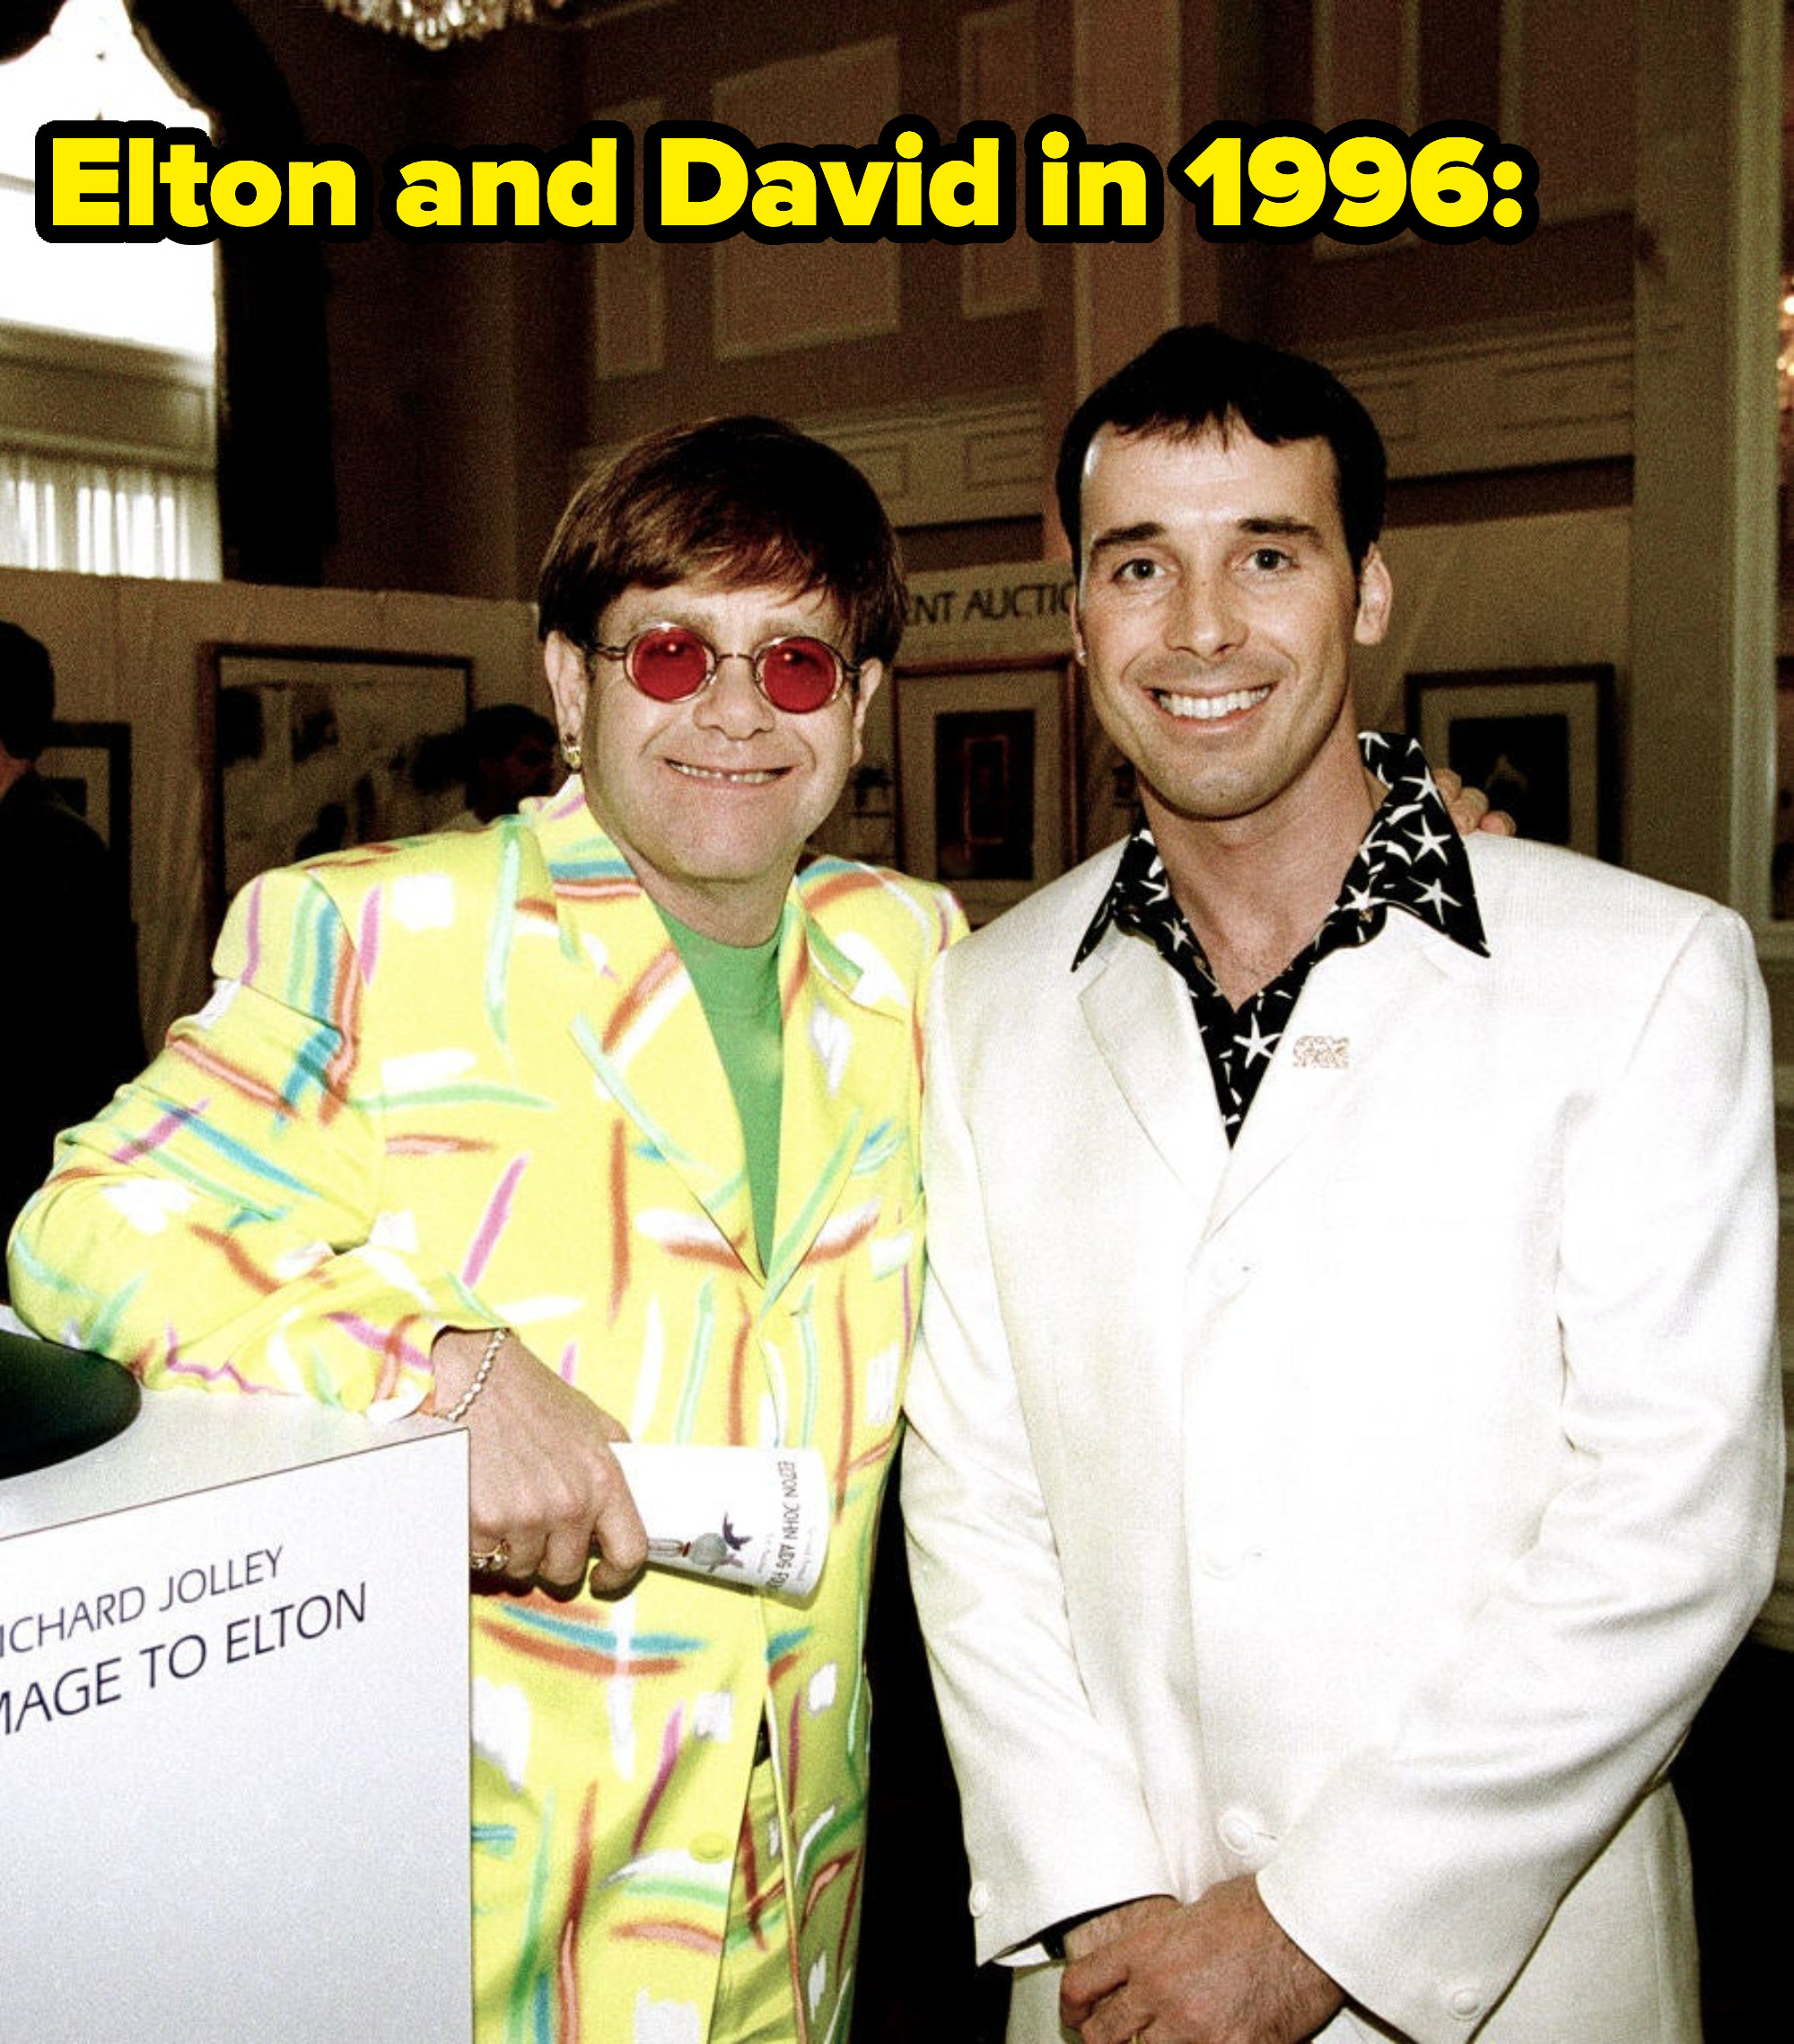 Elton and David smiling in a picture from 1996